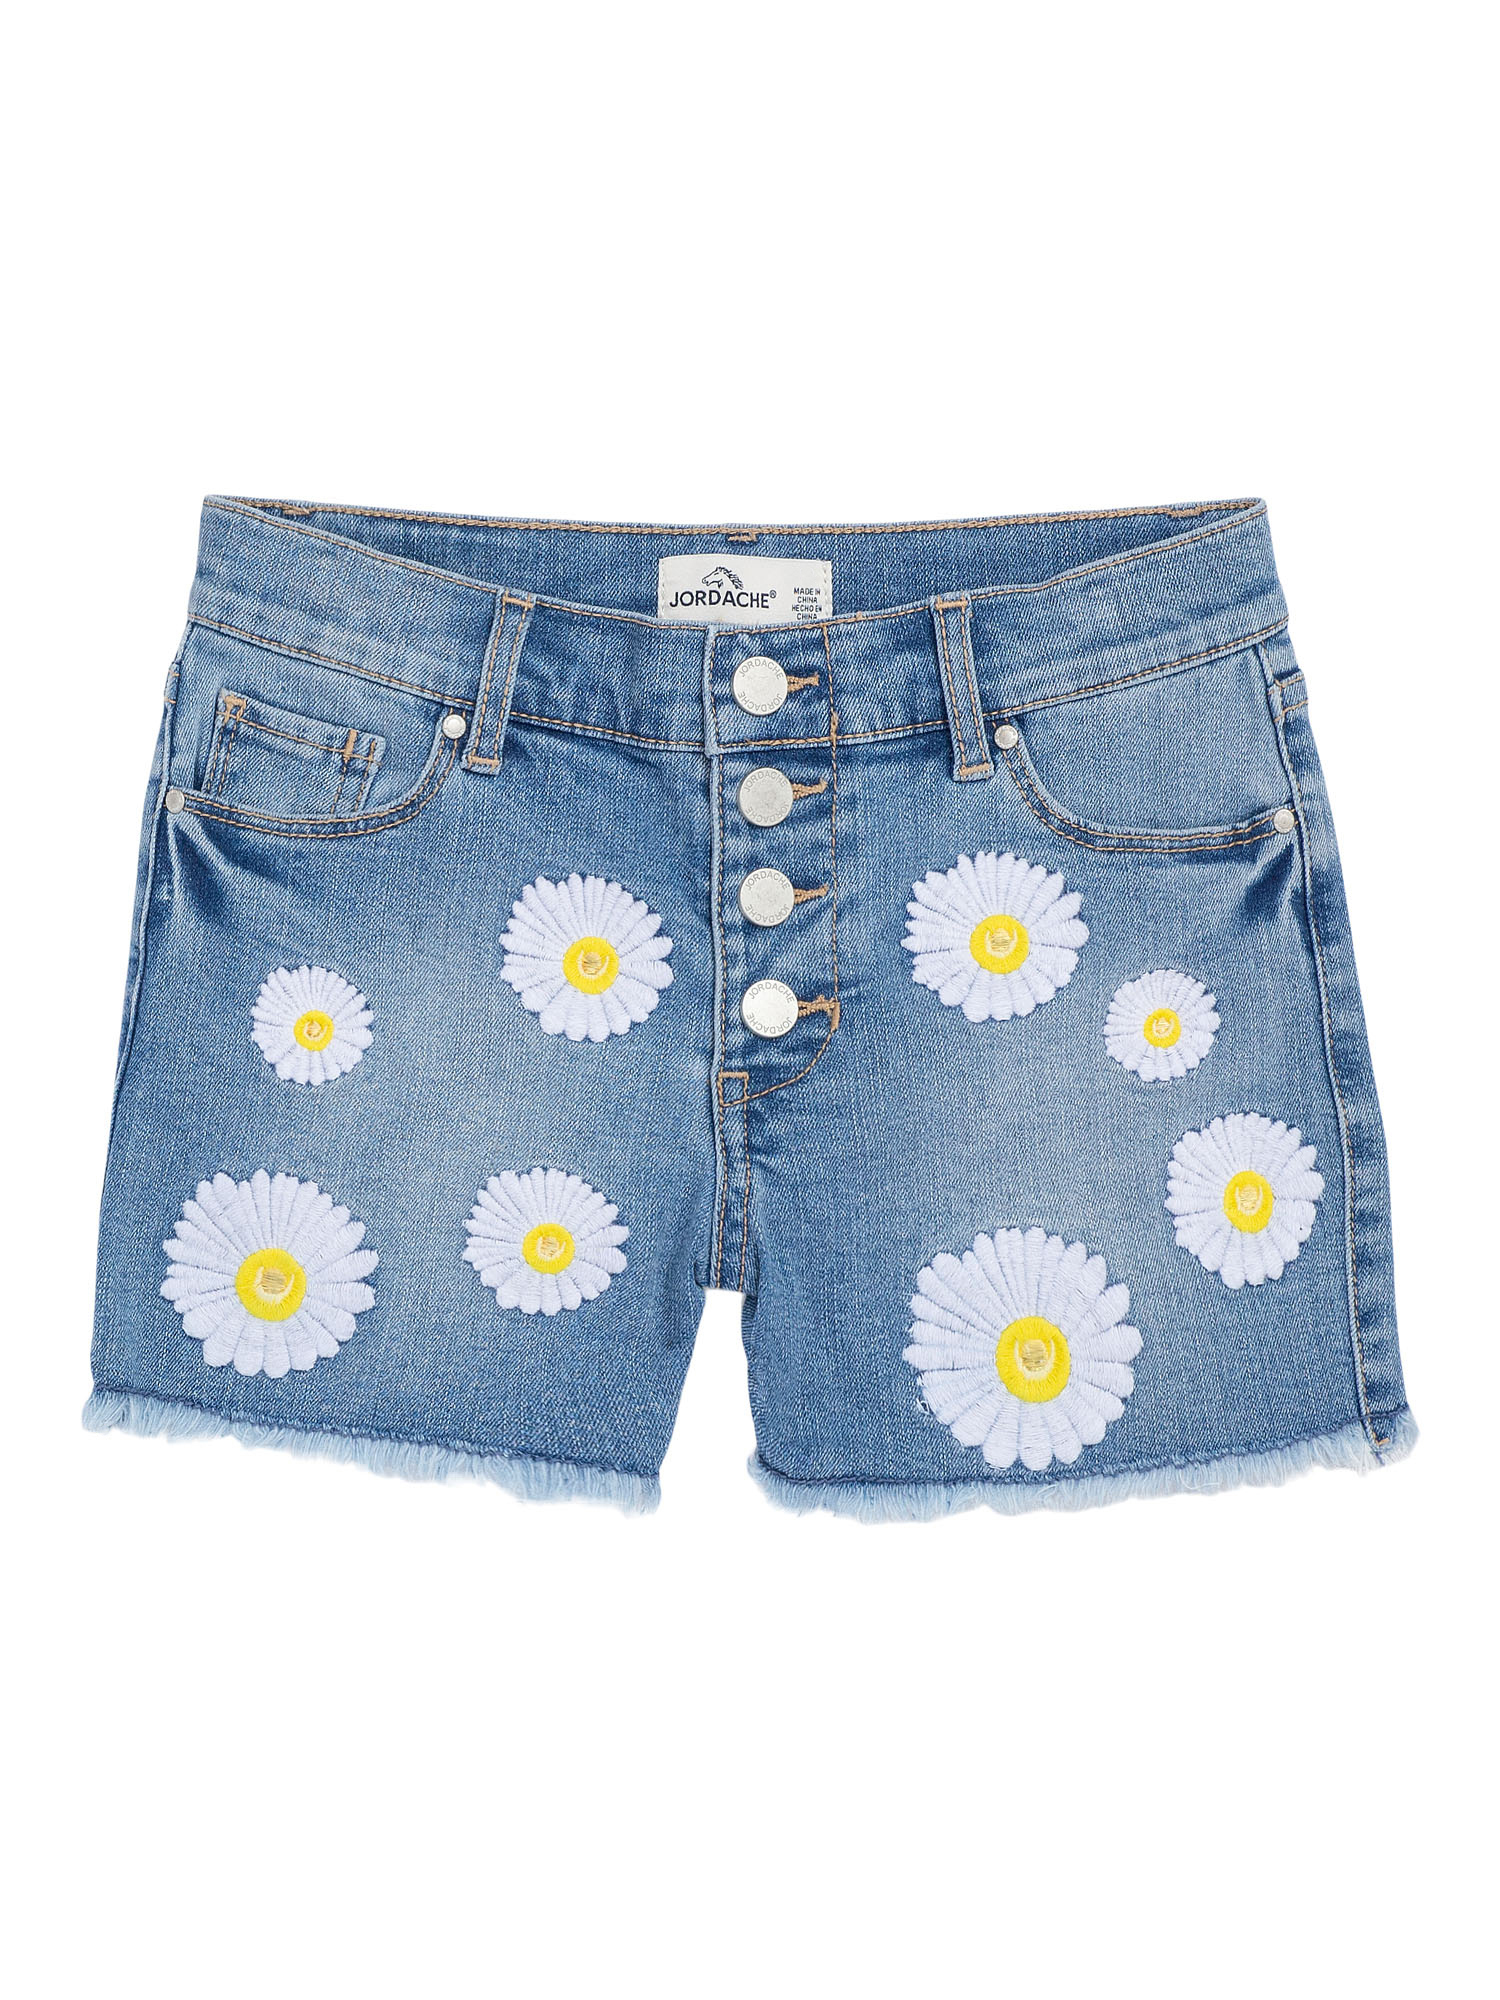 Handmade Beach combers 24M girls cropped denim pant made from recycled jeans with daisy flower applique on the leg Toddler shorts